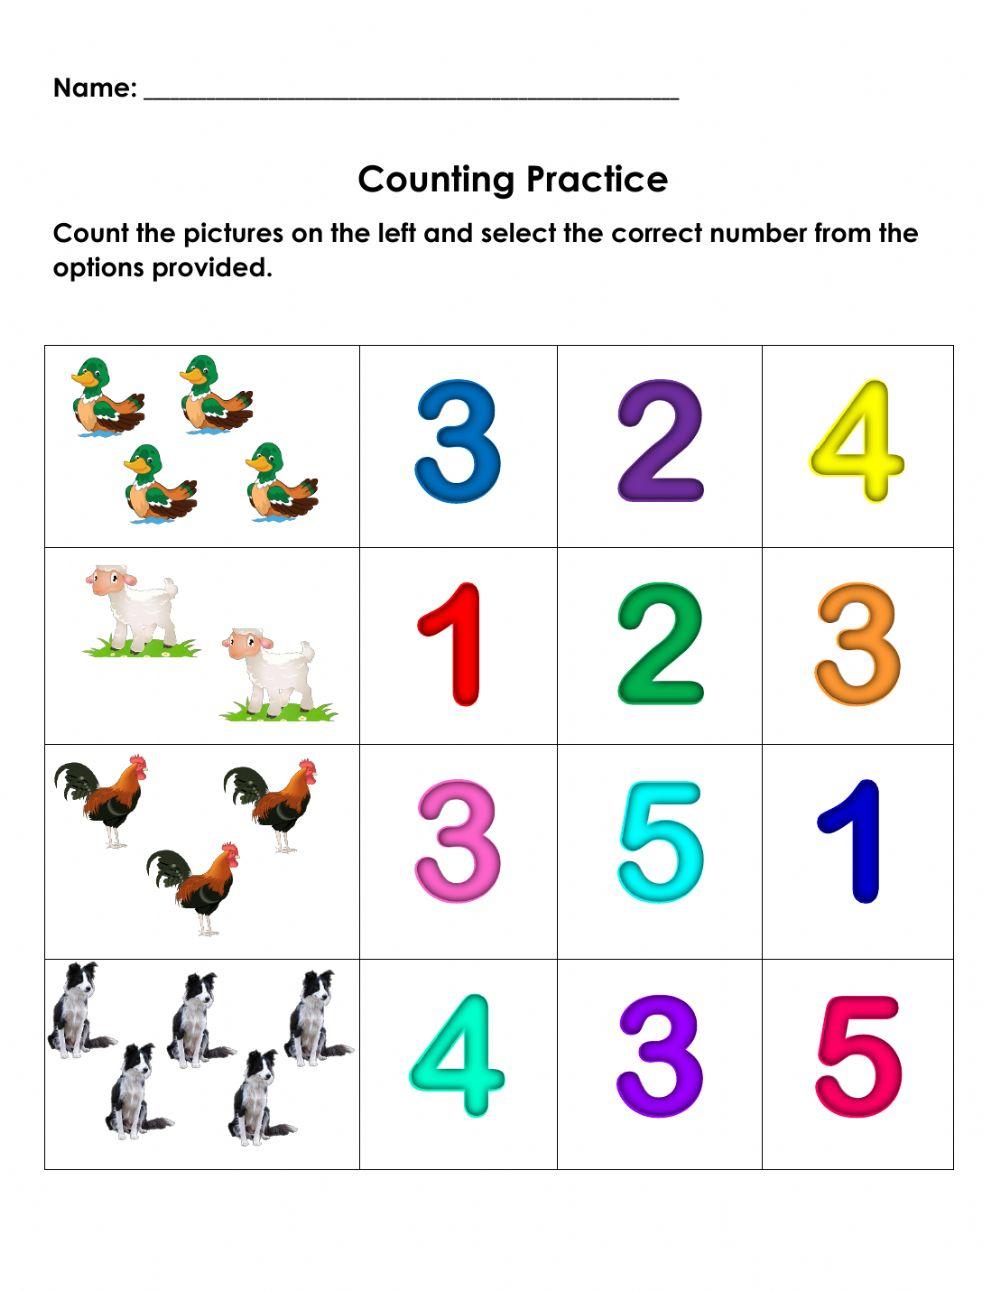 Counting Practice (Numbers 1-5) (Animals on the Farm)